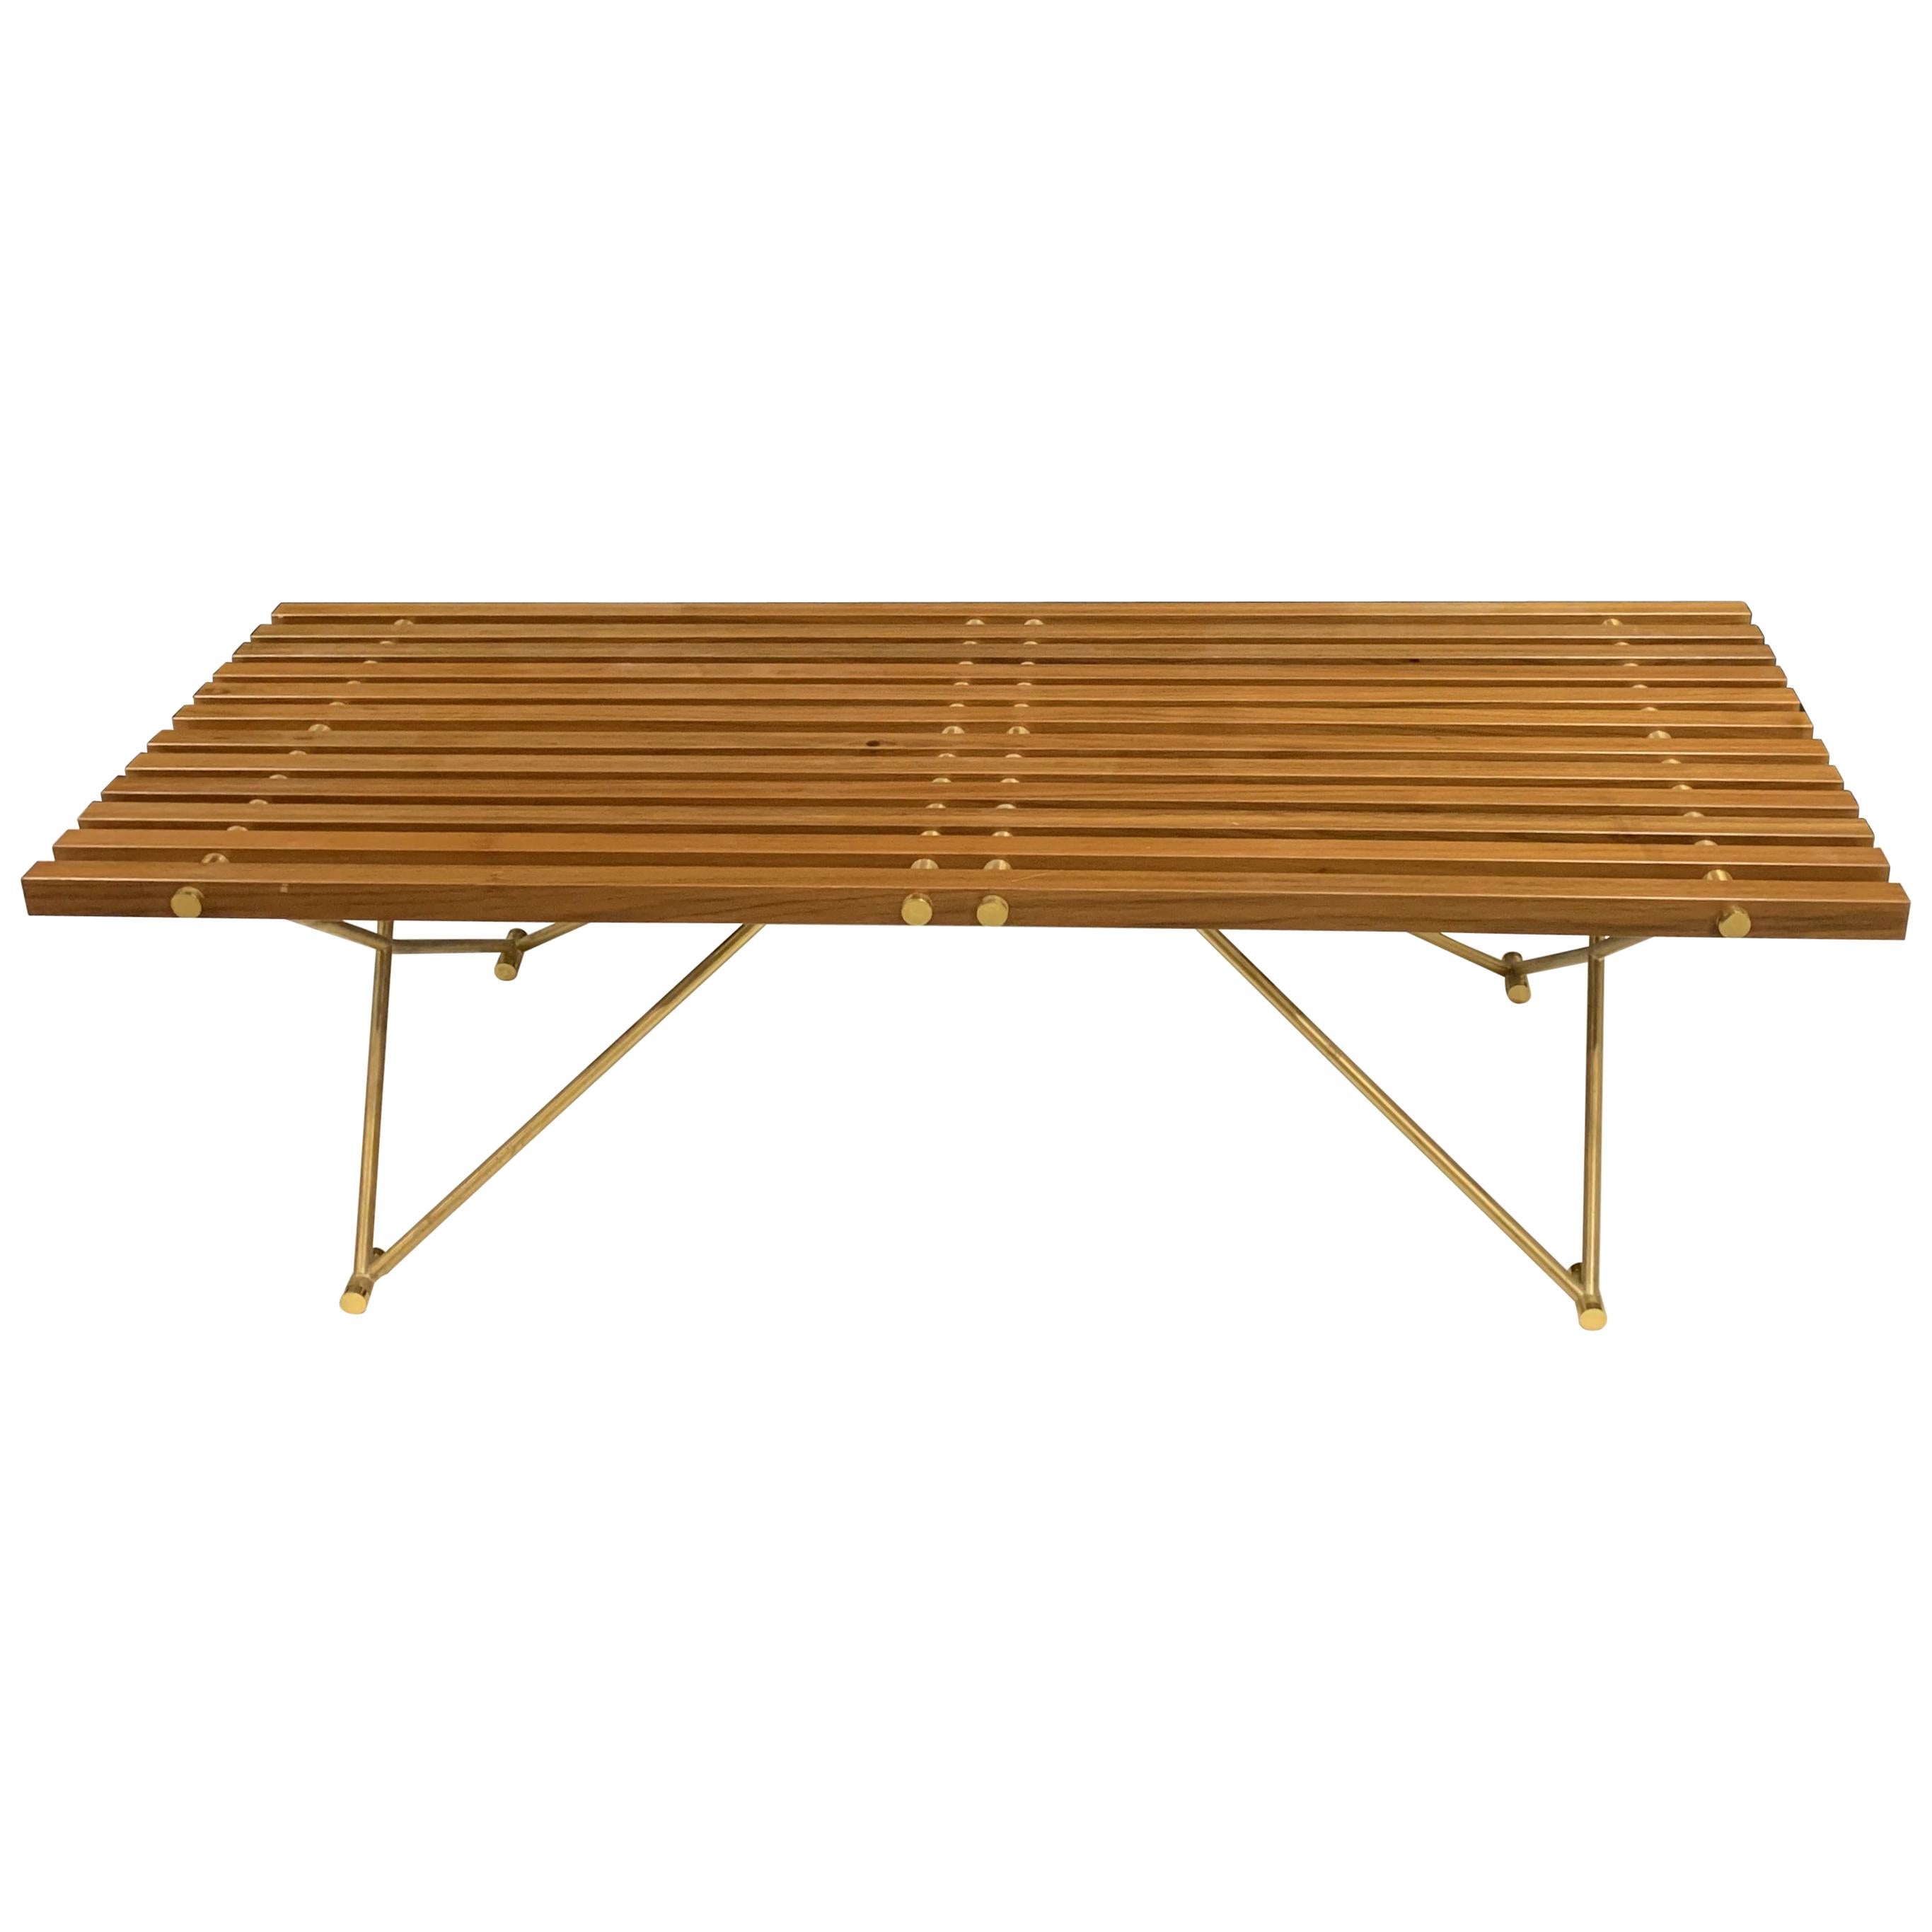 Wonderful Mid-Century Modern Wood Slat Polished Brass Coffee Cocktail Table For Sale